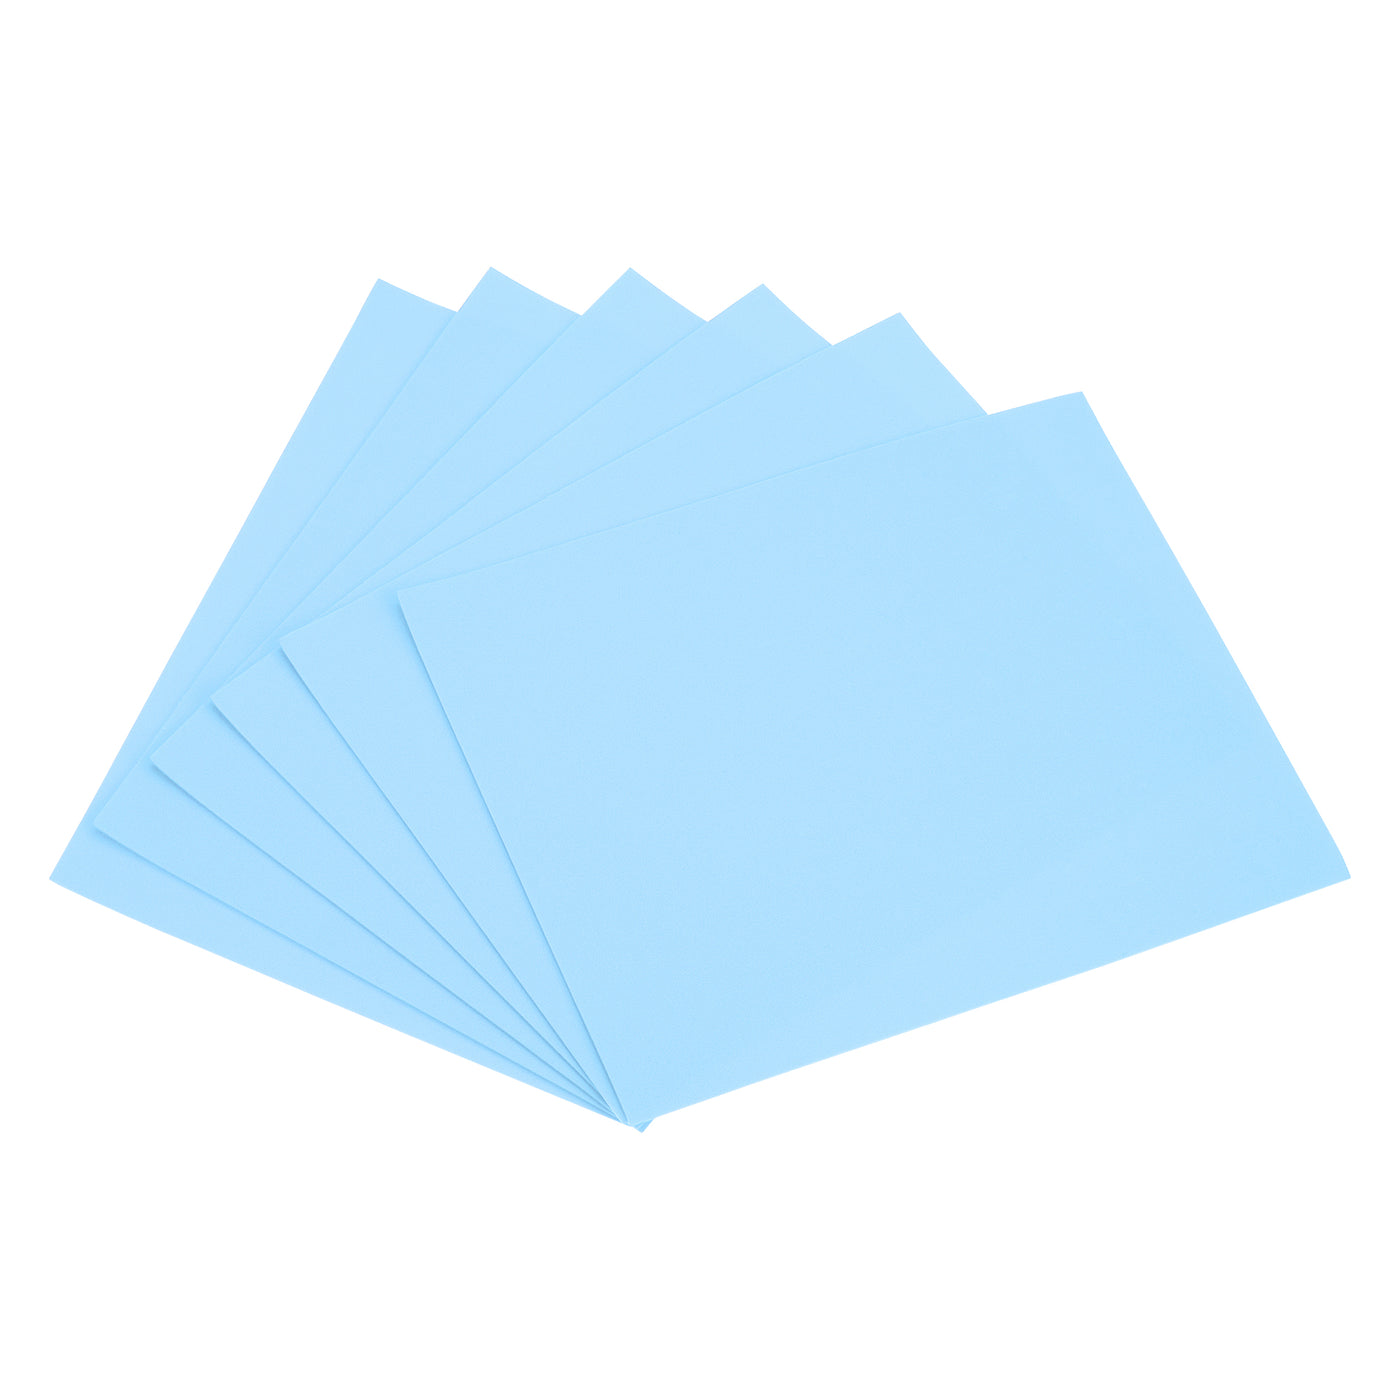 Uxcell Uxcell Light Blue EVA Foam Sheets 11 x 8 inch 1.7mm Thickness for Crafts DIY 6 Pcs